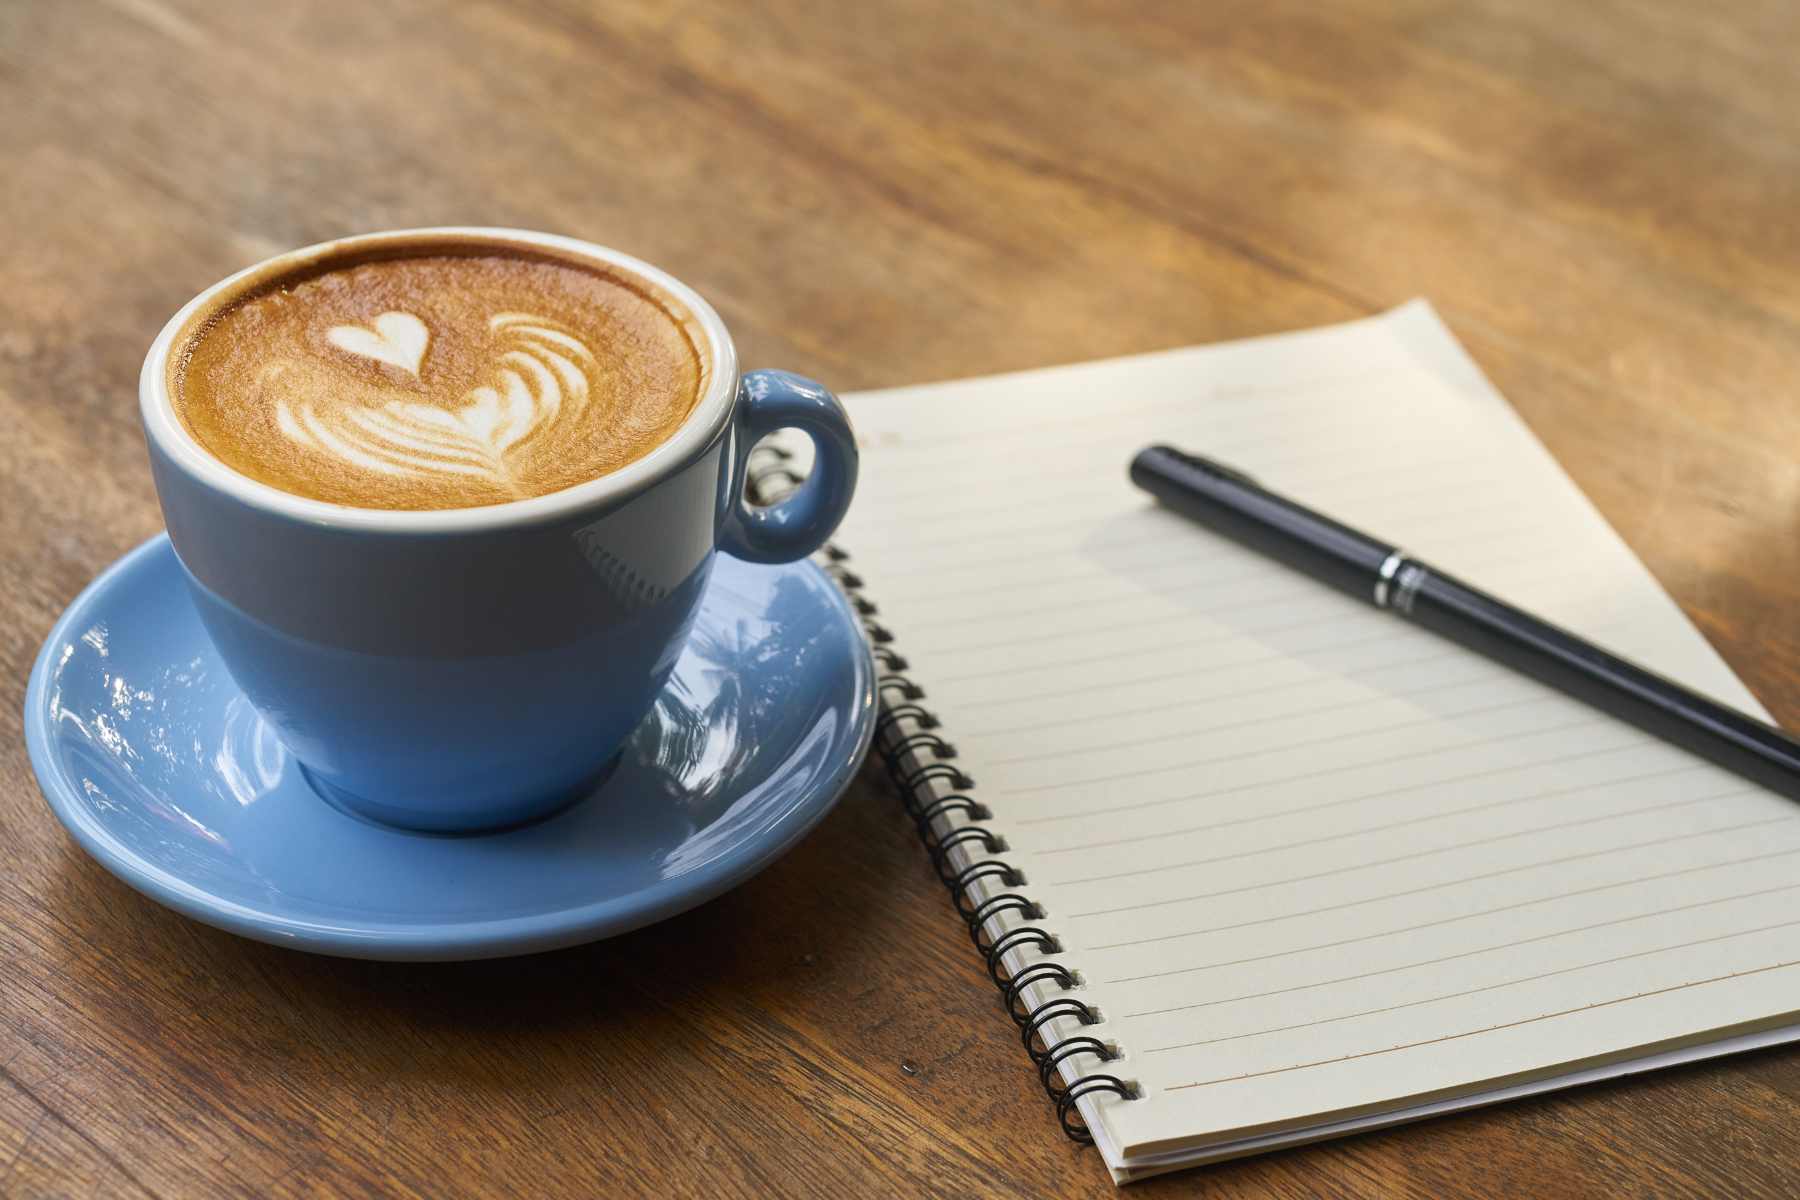 Coffee and pen